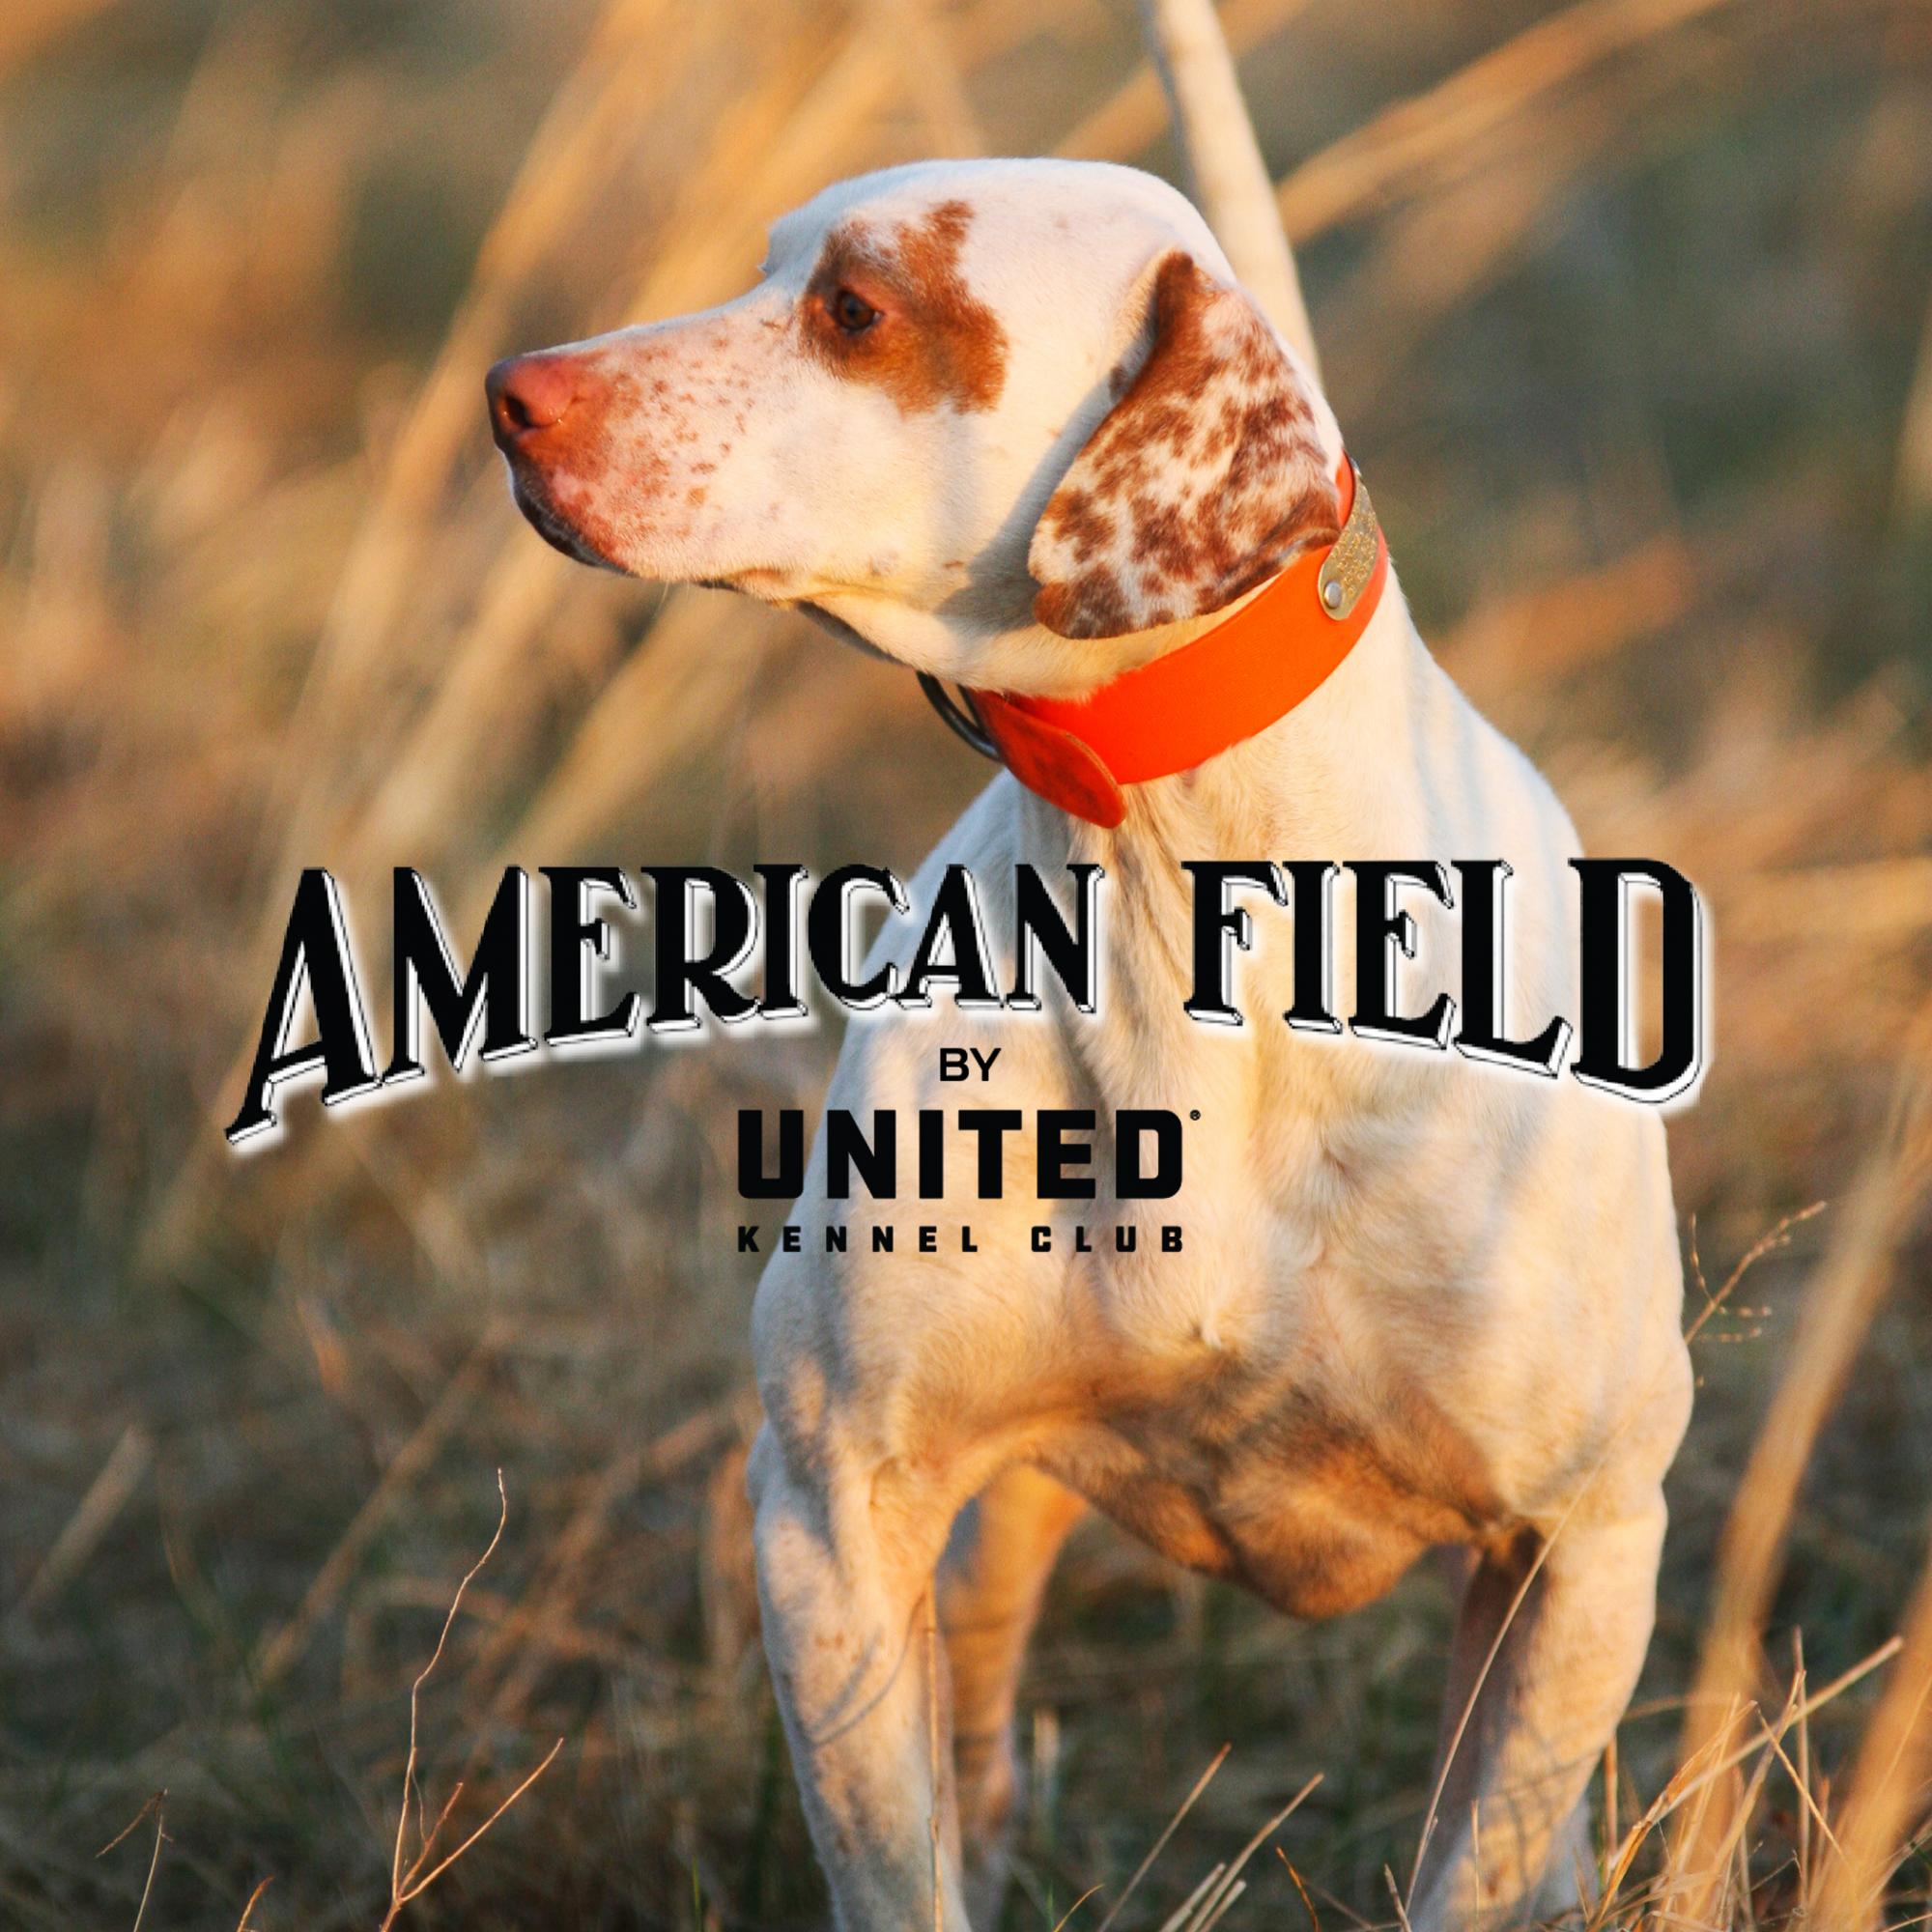 UKC Acquired American Field Sept 1, 2021